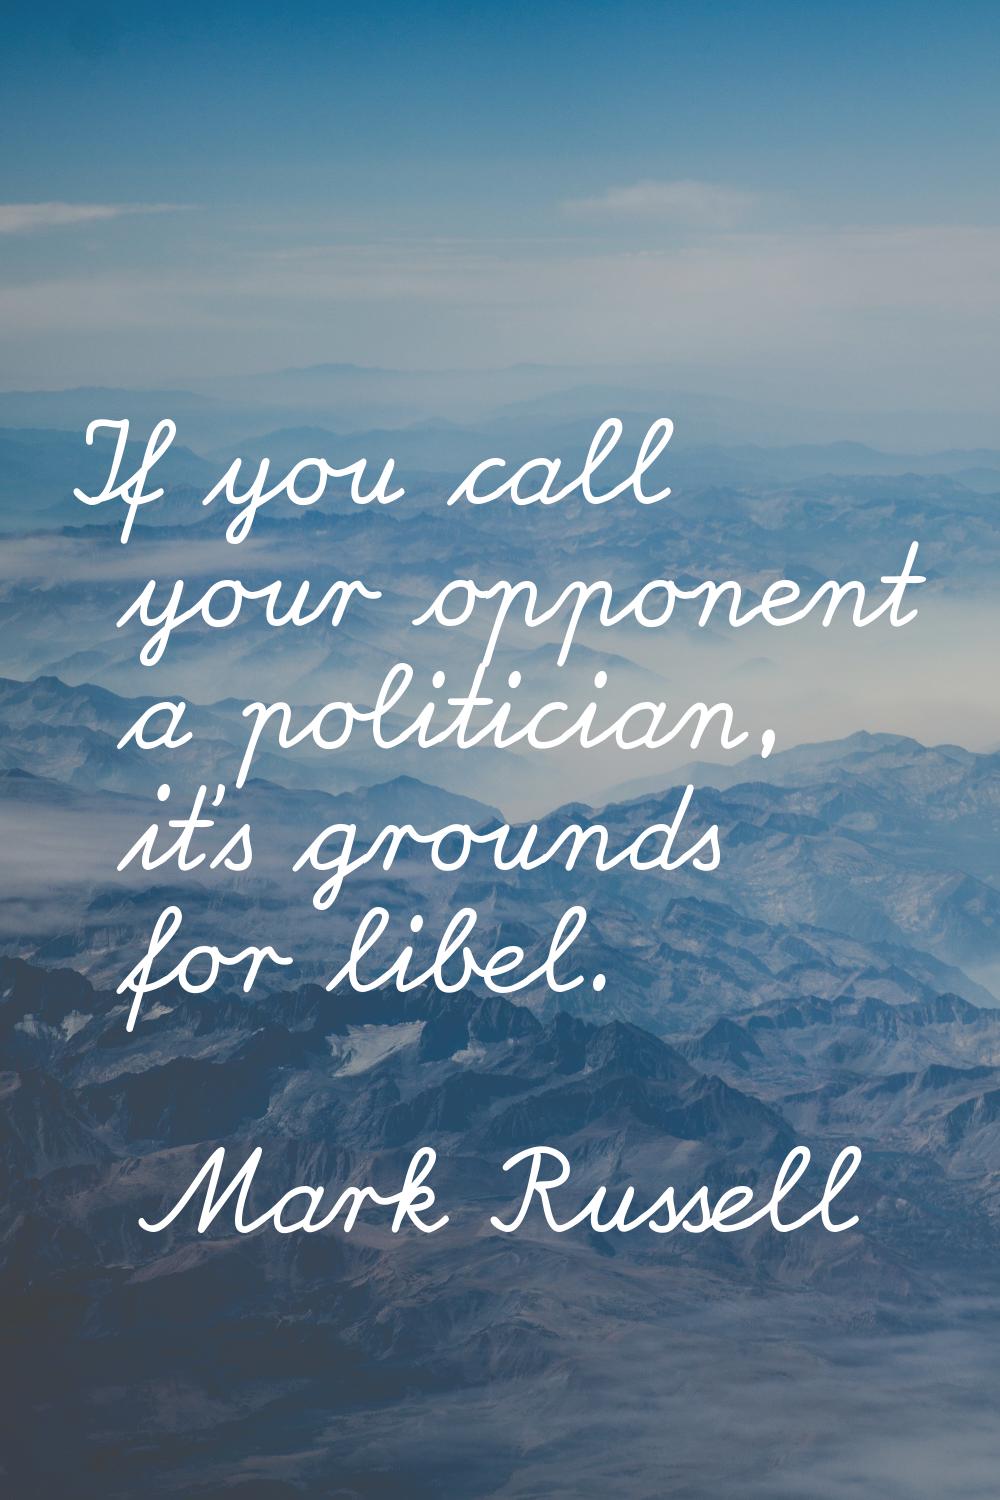 If you call your opponent a politician, it's grounds for libel.